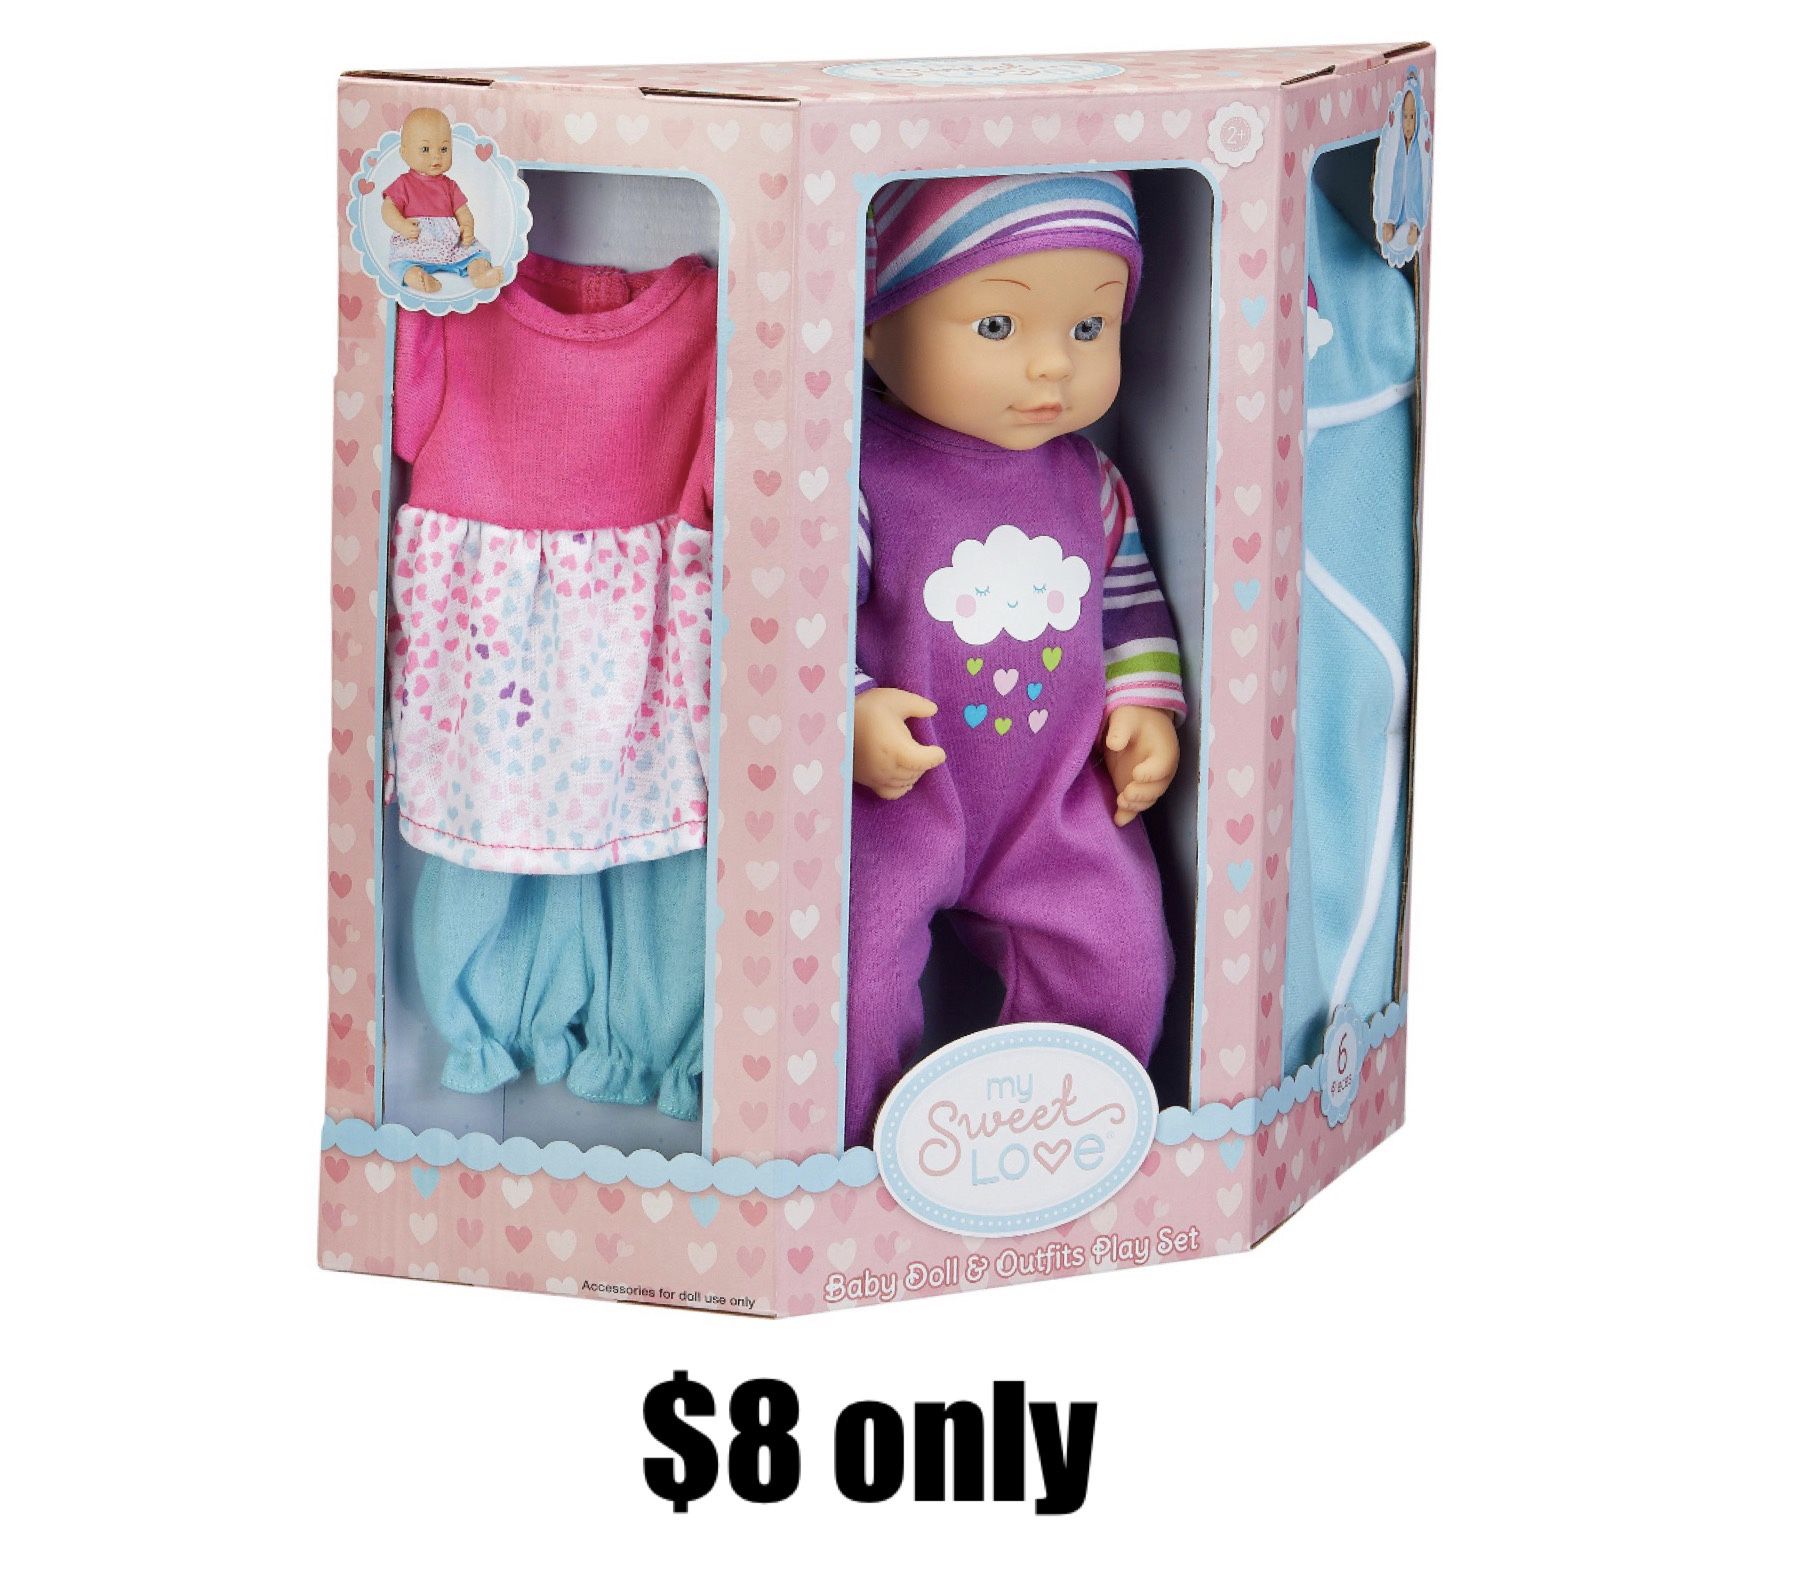 My Sweet Love 12.5" Baby Doll and Outfits Play Set, Rainbow, 6 Pieces